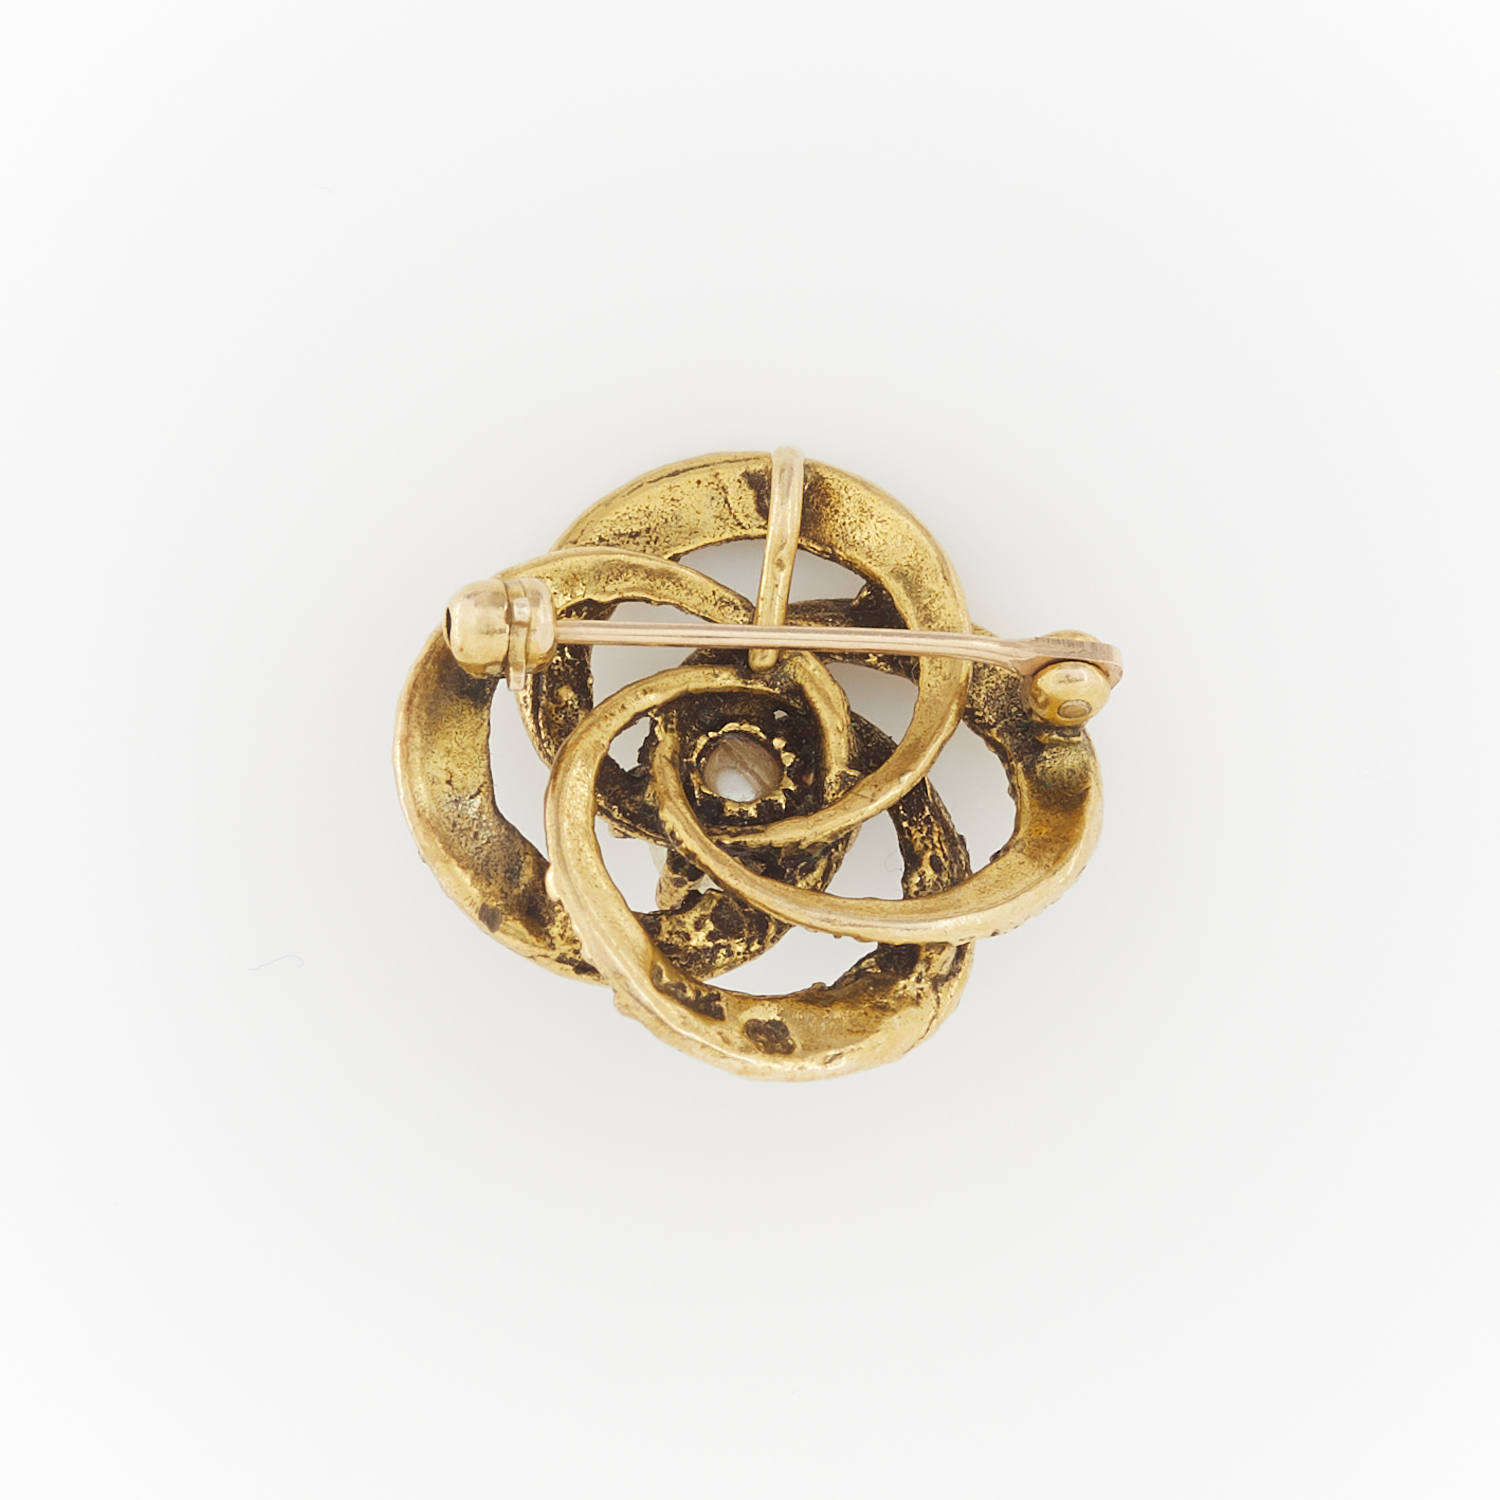 14k Yellow Gold Knot Brooch with Pearl - Image 8 of 8